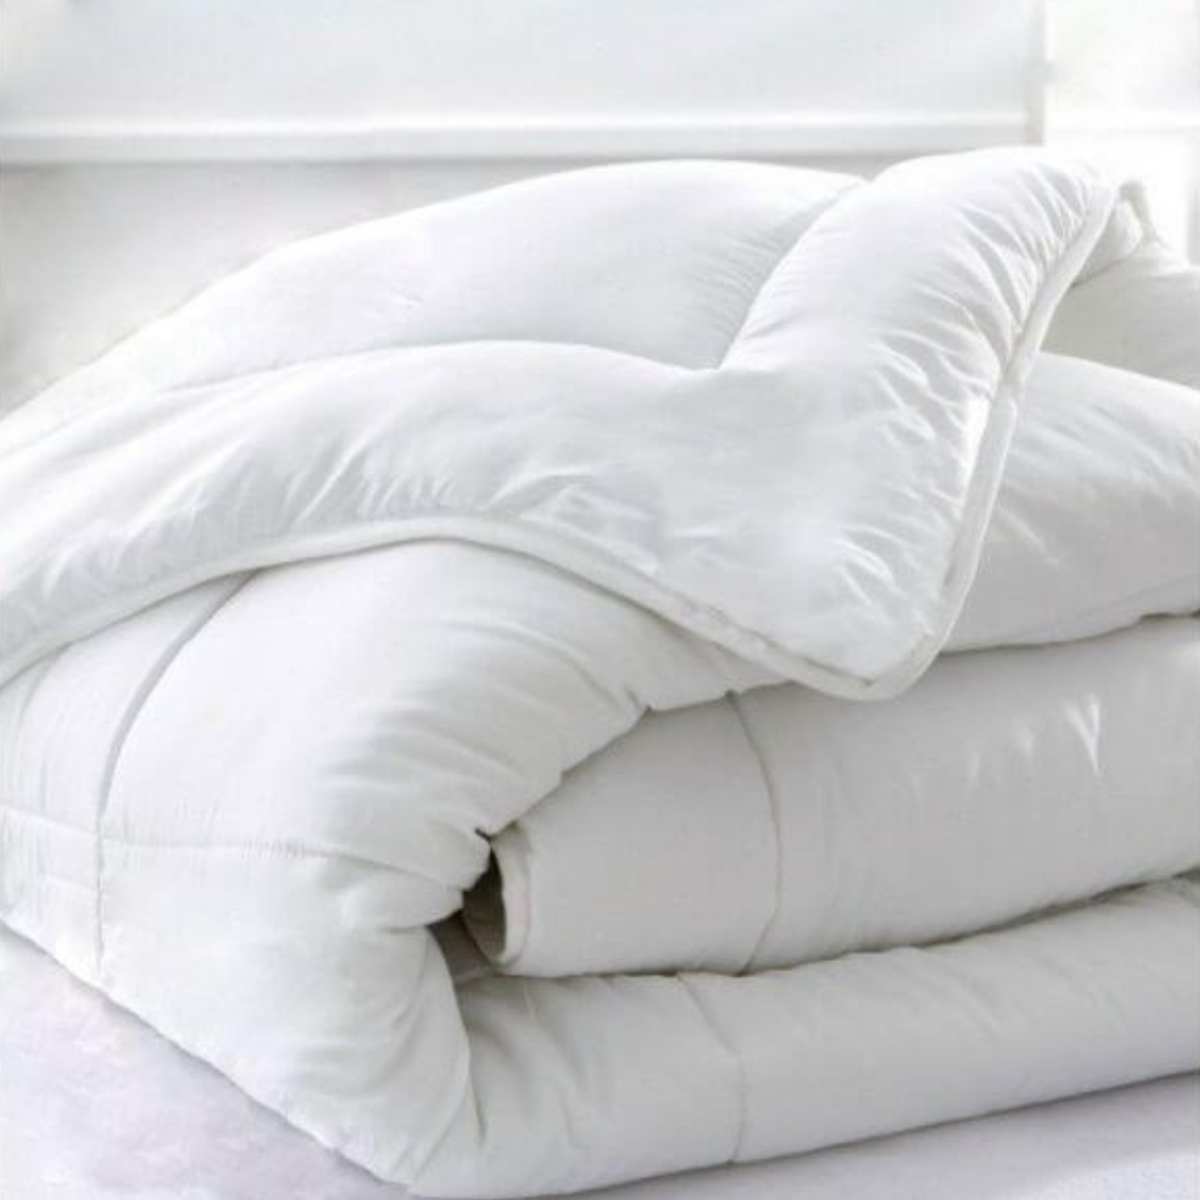 Couette hiver coton bio - 260 x 240 cm - 400g/m² - Made in France